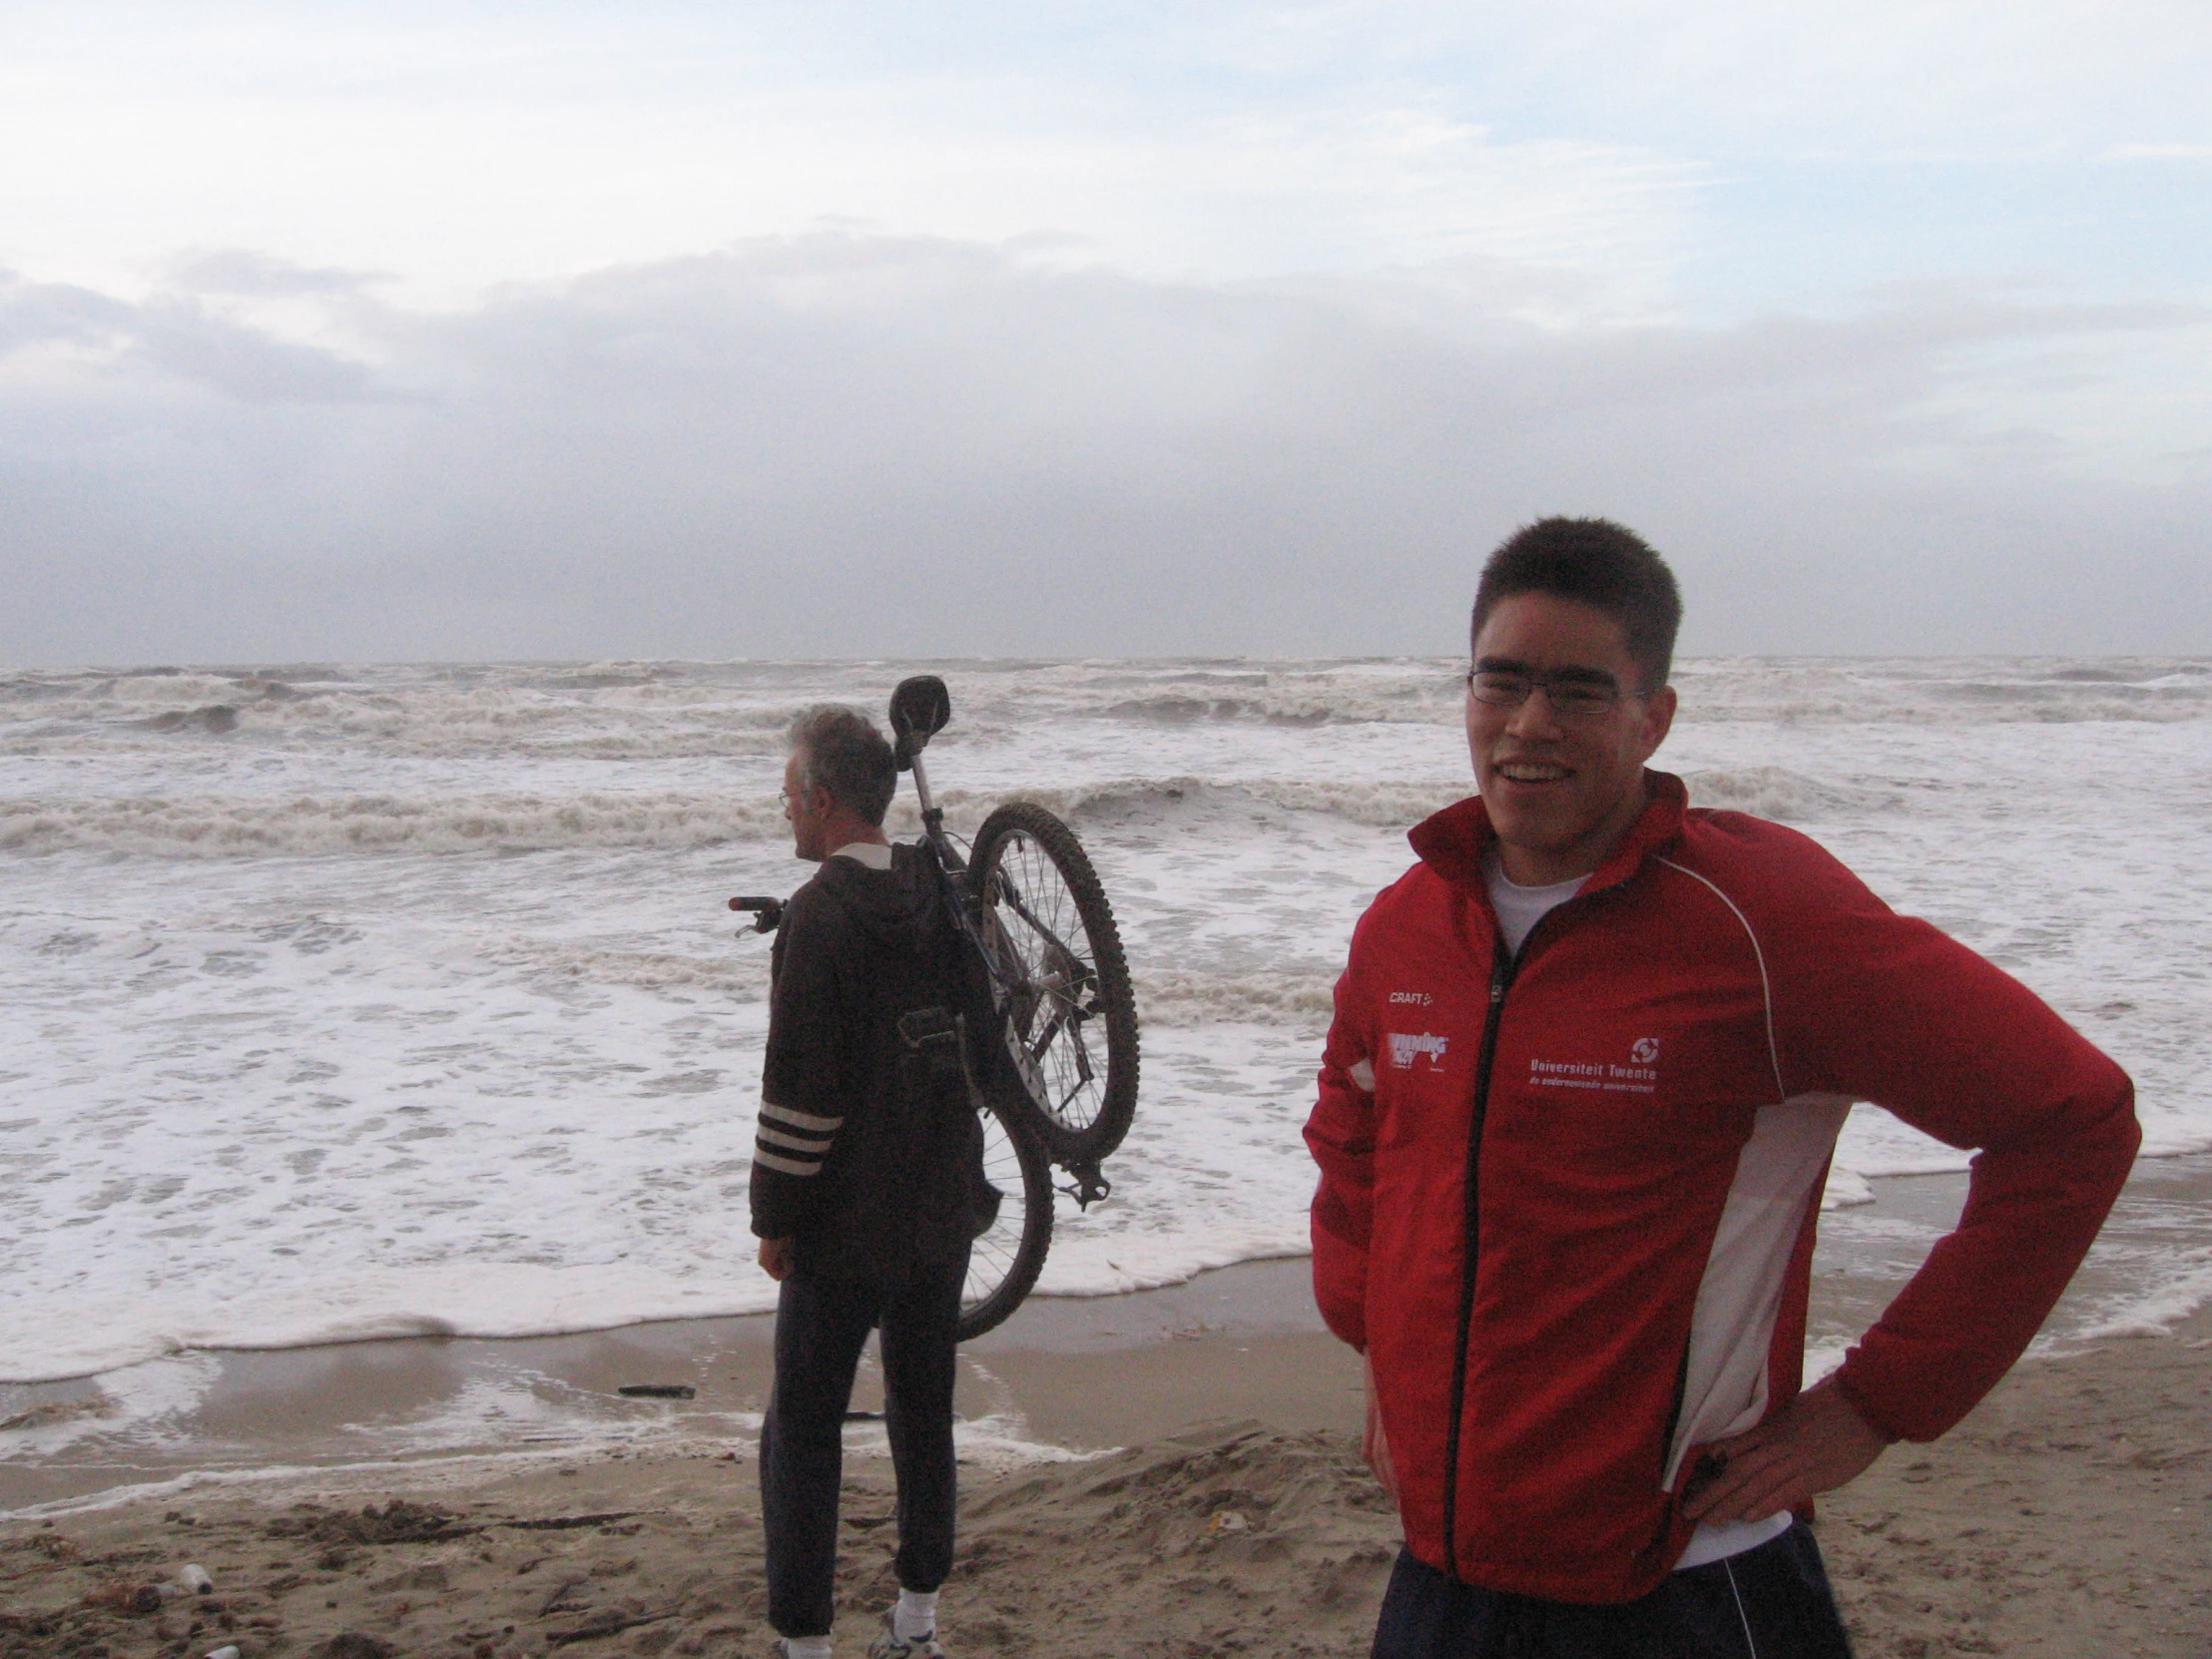 a man standing next to the ocean with another person holding up a bicycle